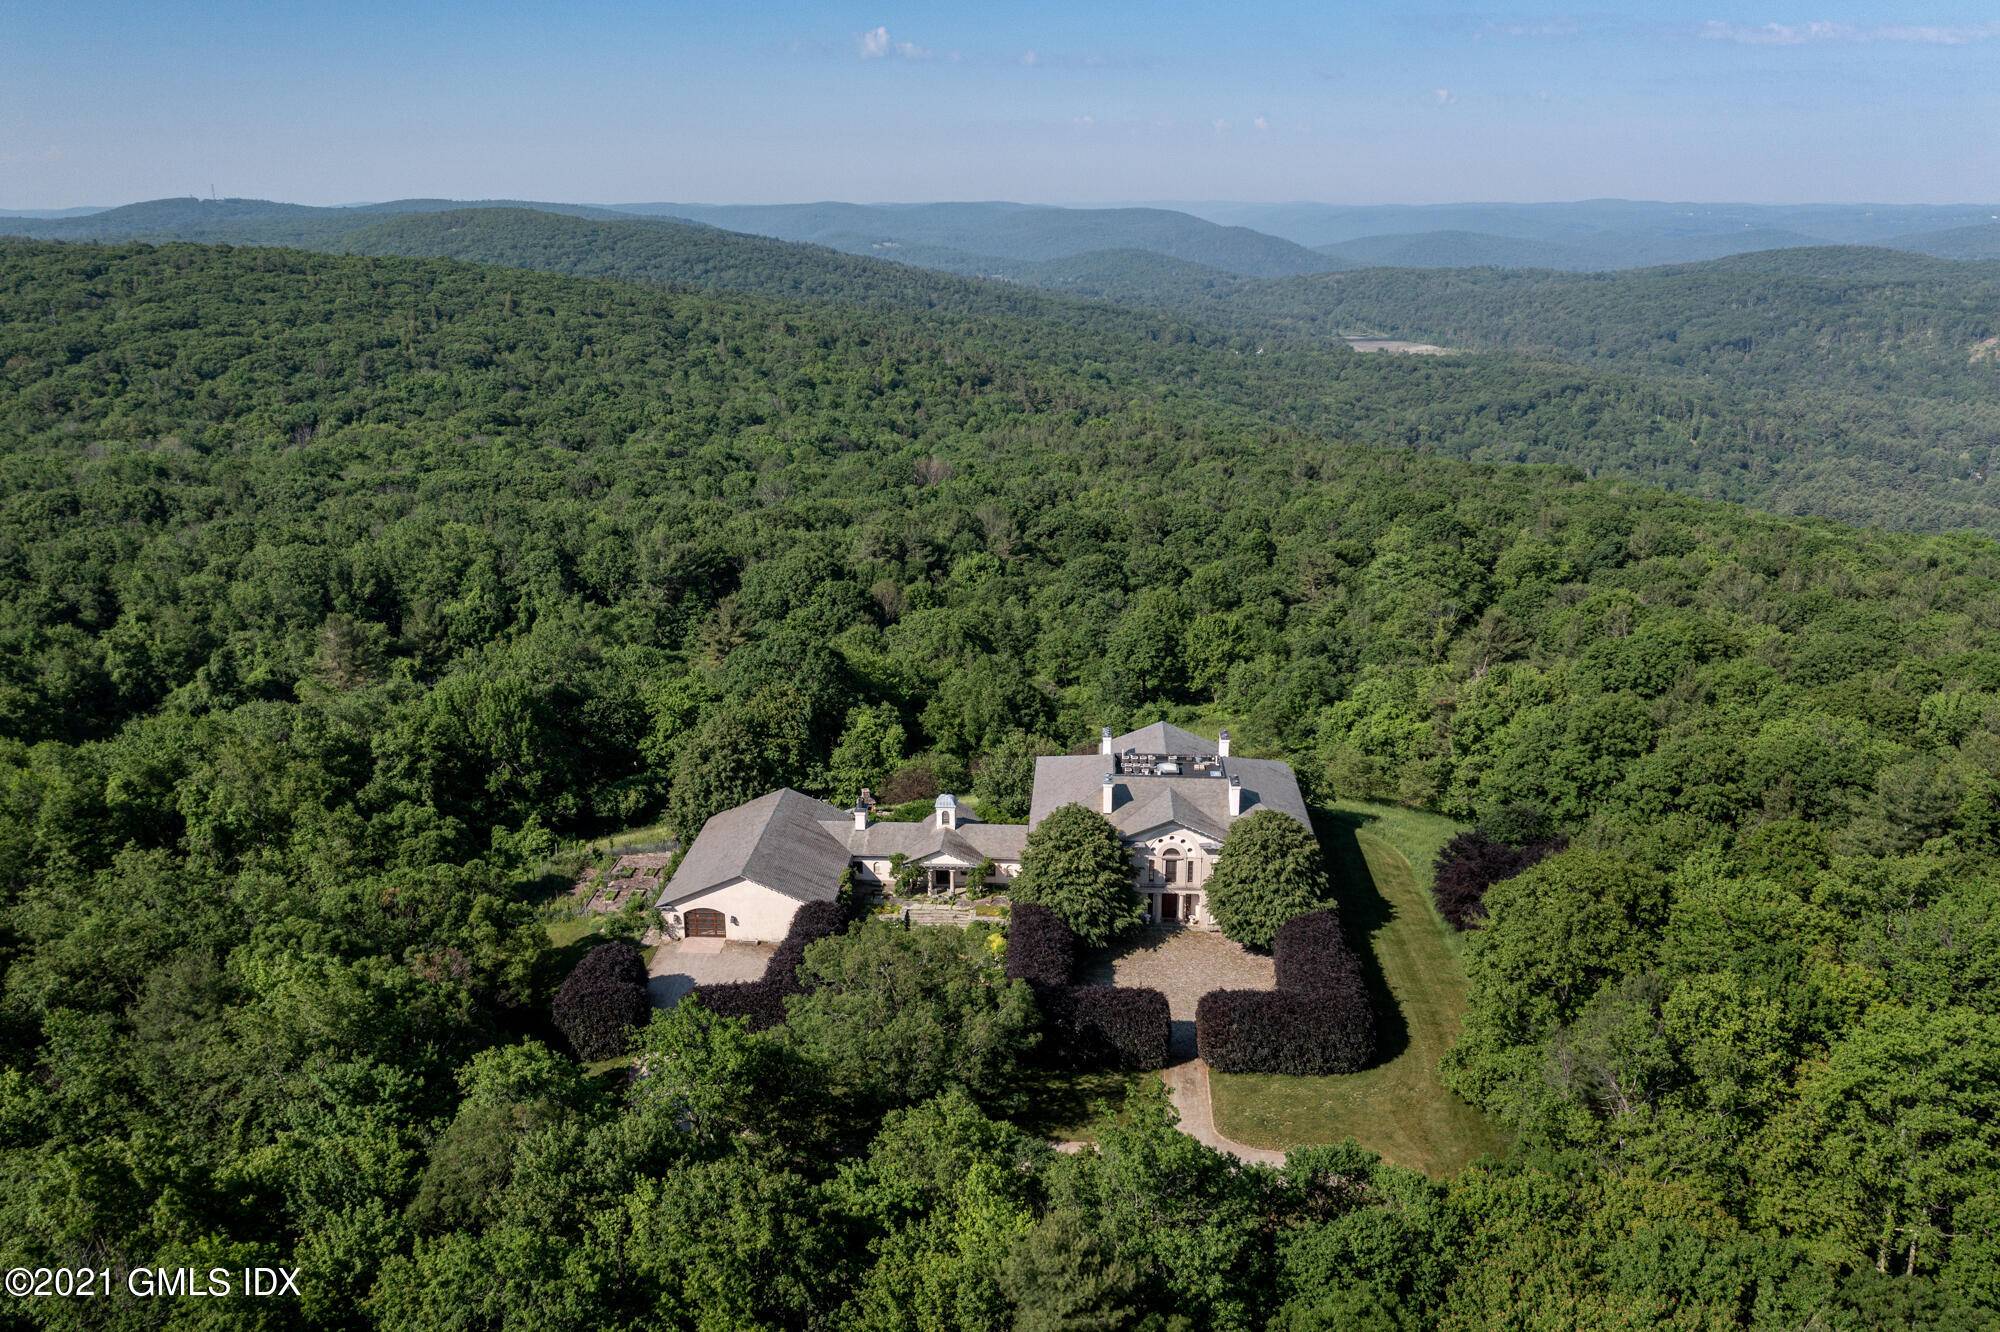 Villa Catarina A grand Tuscan style estate spectacularly situated on 550 acres in the heart of Litchfield County offers unparalleled privacy and security as well as magnificent tri state views ...